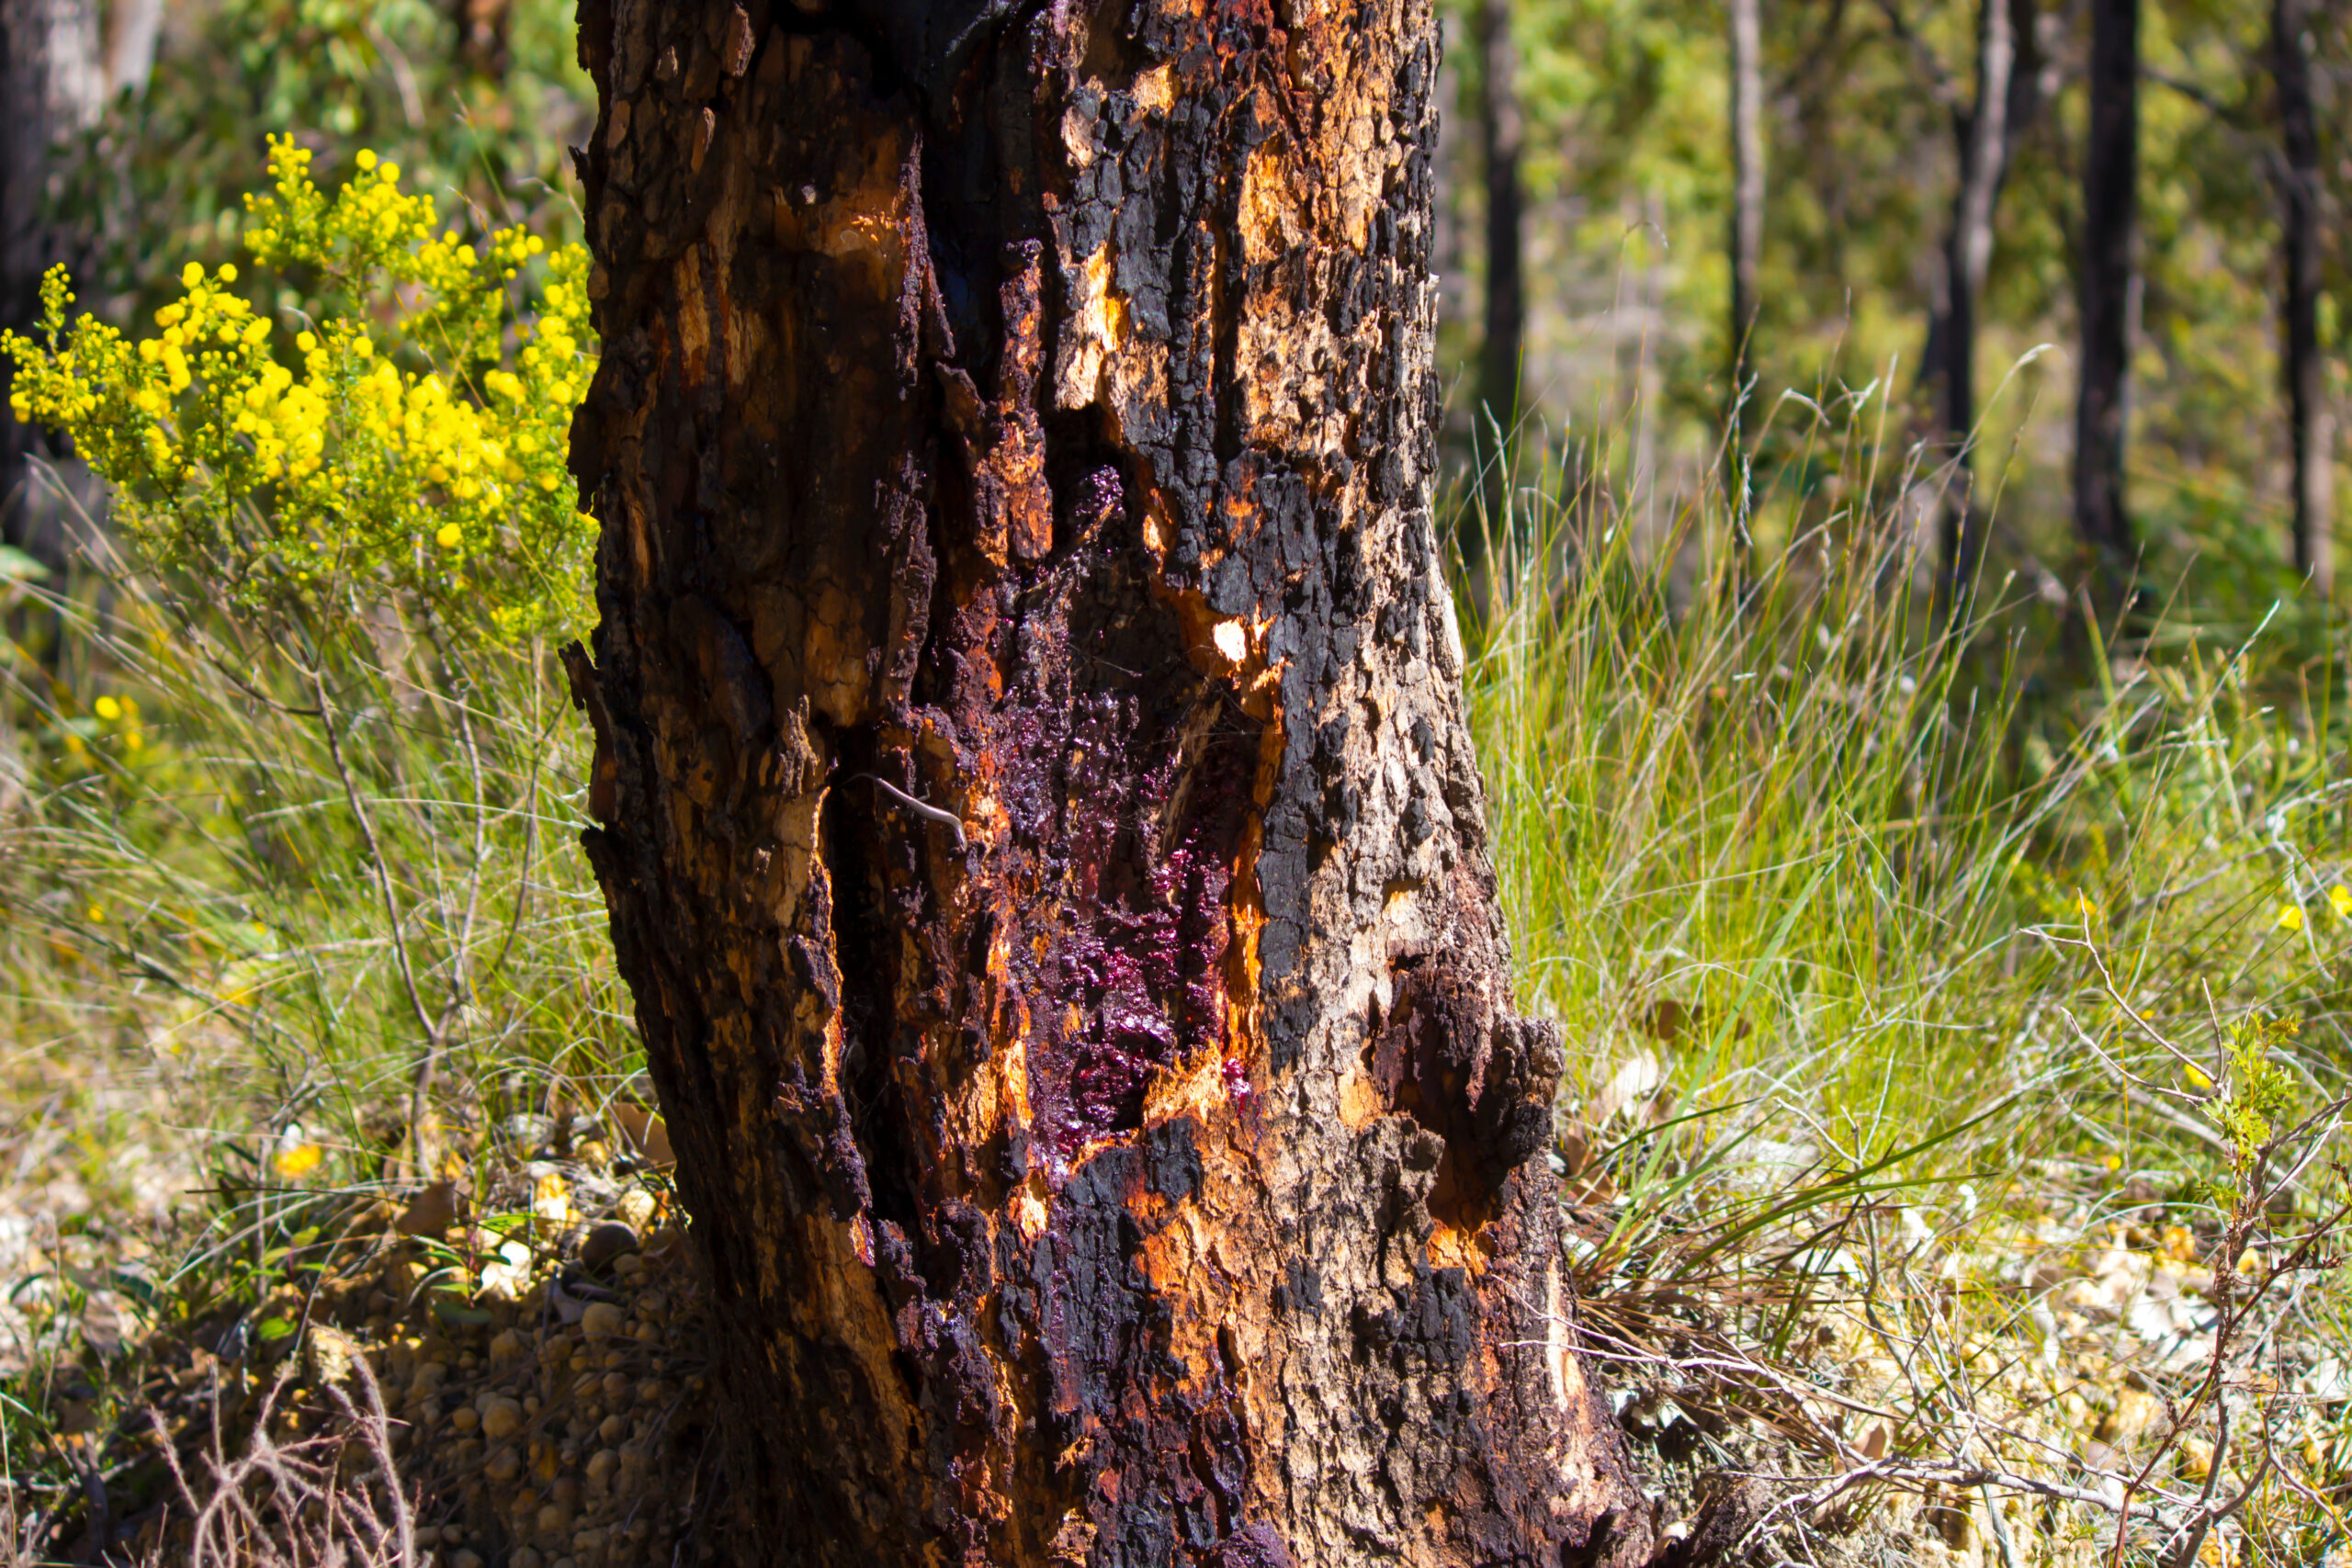 A photo of the trunk of a marri tree. The trunk has rough bark which is a mix of colours – black, orange, and grey – suggesting it may have been burnt recently.